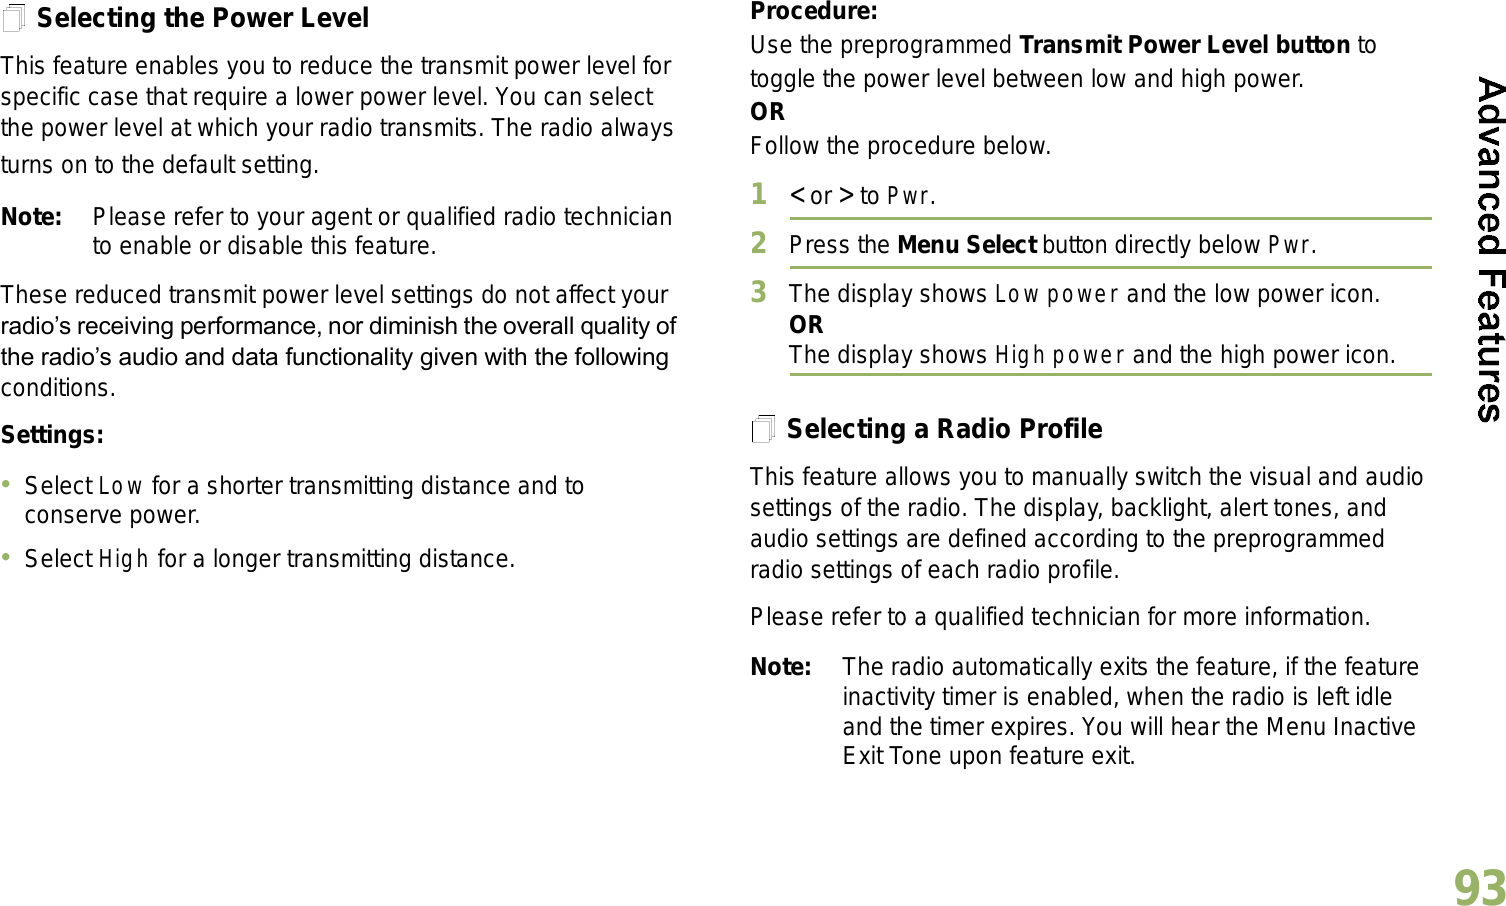 English93Selecting the Power LevelThis feature enables you to reduce the transmit power level for specific case that require a lower power level. You can select the power level at which your radio transmits. The radio always turns on to the default setting.Note: Please refer to your agent or qualified radio technician to enable or disable this feature.These reduced transmit power level settings do not affect your radios receiving performance, nor diminish the overall quality of the radios audio and data functionality given with the following conditions.Settings: Select Low for a shorter transmitting distance and to conserve power.Select High for a longer transmitting distance.Procedure: Use the preprogrammed Transmit Power Level button to toggle the power level between low and high power.ORFollow the procedure below.1&lt; or &gt; to Pwr.2Press the Menu Select button directly below Pwr. 3The display shows Low power and the low power icon.ORThe display shows High power and the high power icon.Selecting a Radio ProfileThis feature allows you to manually switch the visual and audio settings of the radio. The display, backlight, alert tones, and audio settings are defined according to the preprogrammed radio settings of each radio profile.Please refer to a qualified technician for more information.Note: The radio automatically exits the feature, if the feature inactivity timer is enabled, when the radio is left idle and the timer expires. You will hear the Menu Inactive Exit Tone upon feature exit.